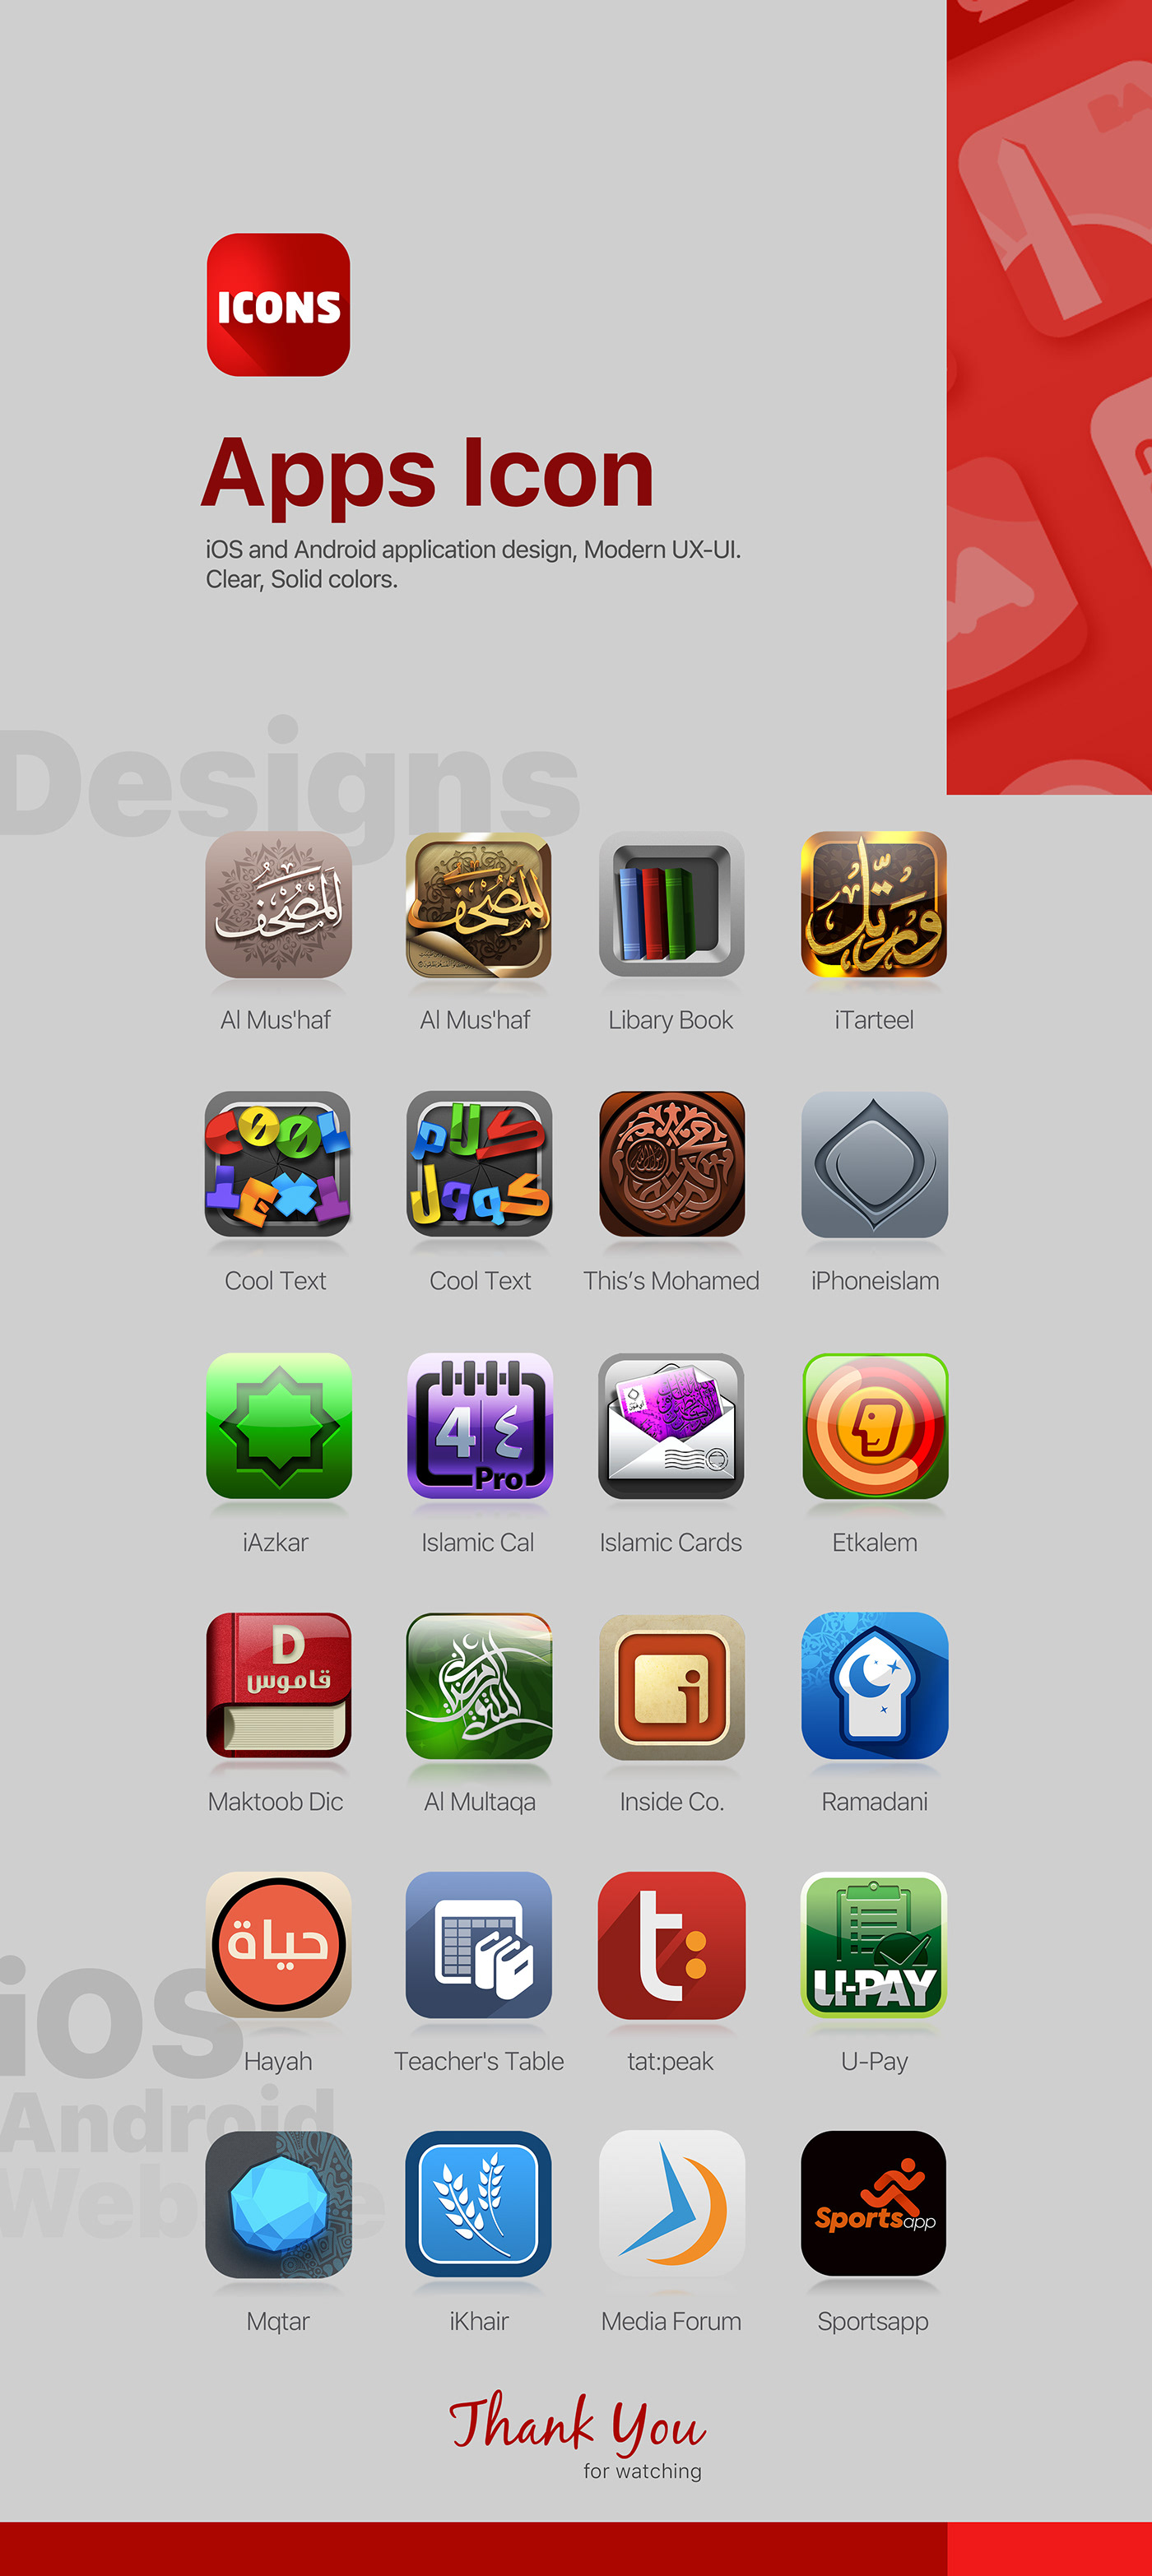 iPhone Apps Icons iphone iphone app iphone icon Mobile UI apps icons